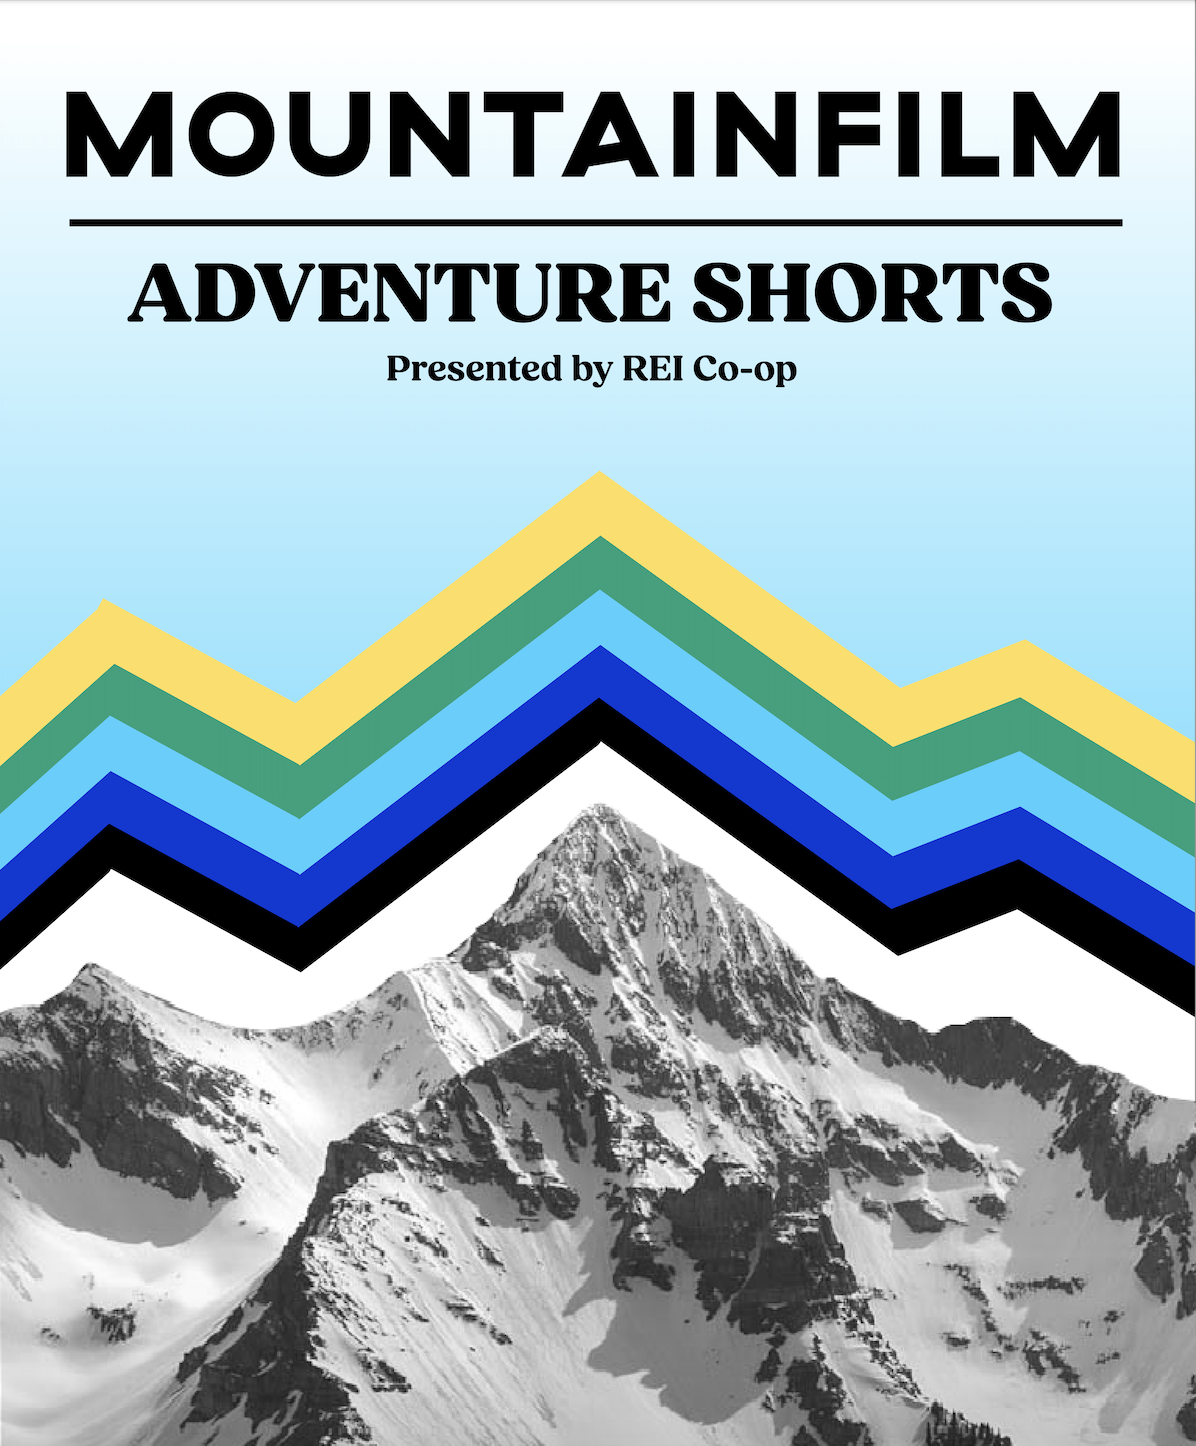 AMC THEATRES®, REI CO-OP STUDIOS, AND MOUNTAINFILM TEAM UP TO BRING “MOUNTAINFILM ADVENTURE SHORTS” – TO THE BIG SCREEN